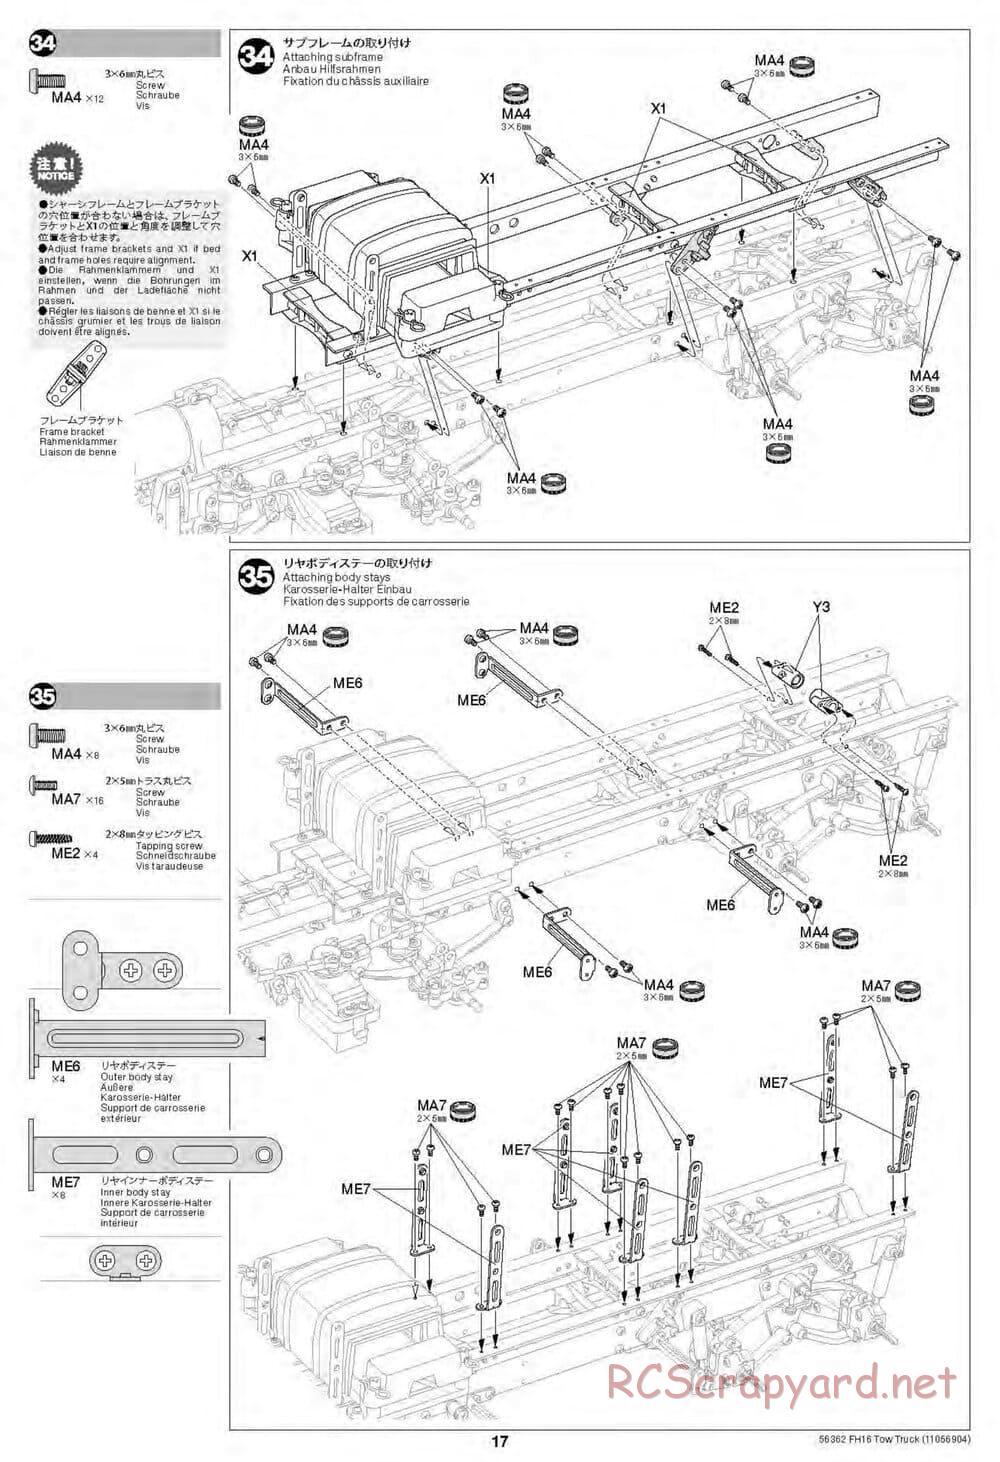 Tamiya - Volvo FH16 Globetrotter 750 8x4 Tow Truck - Manual - Page 17